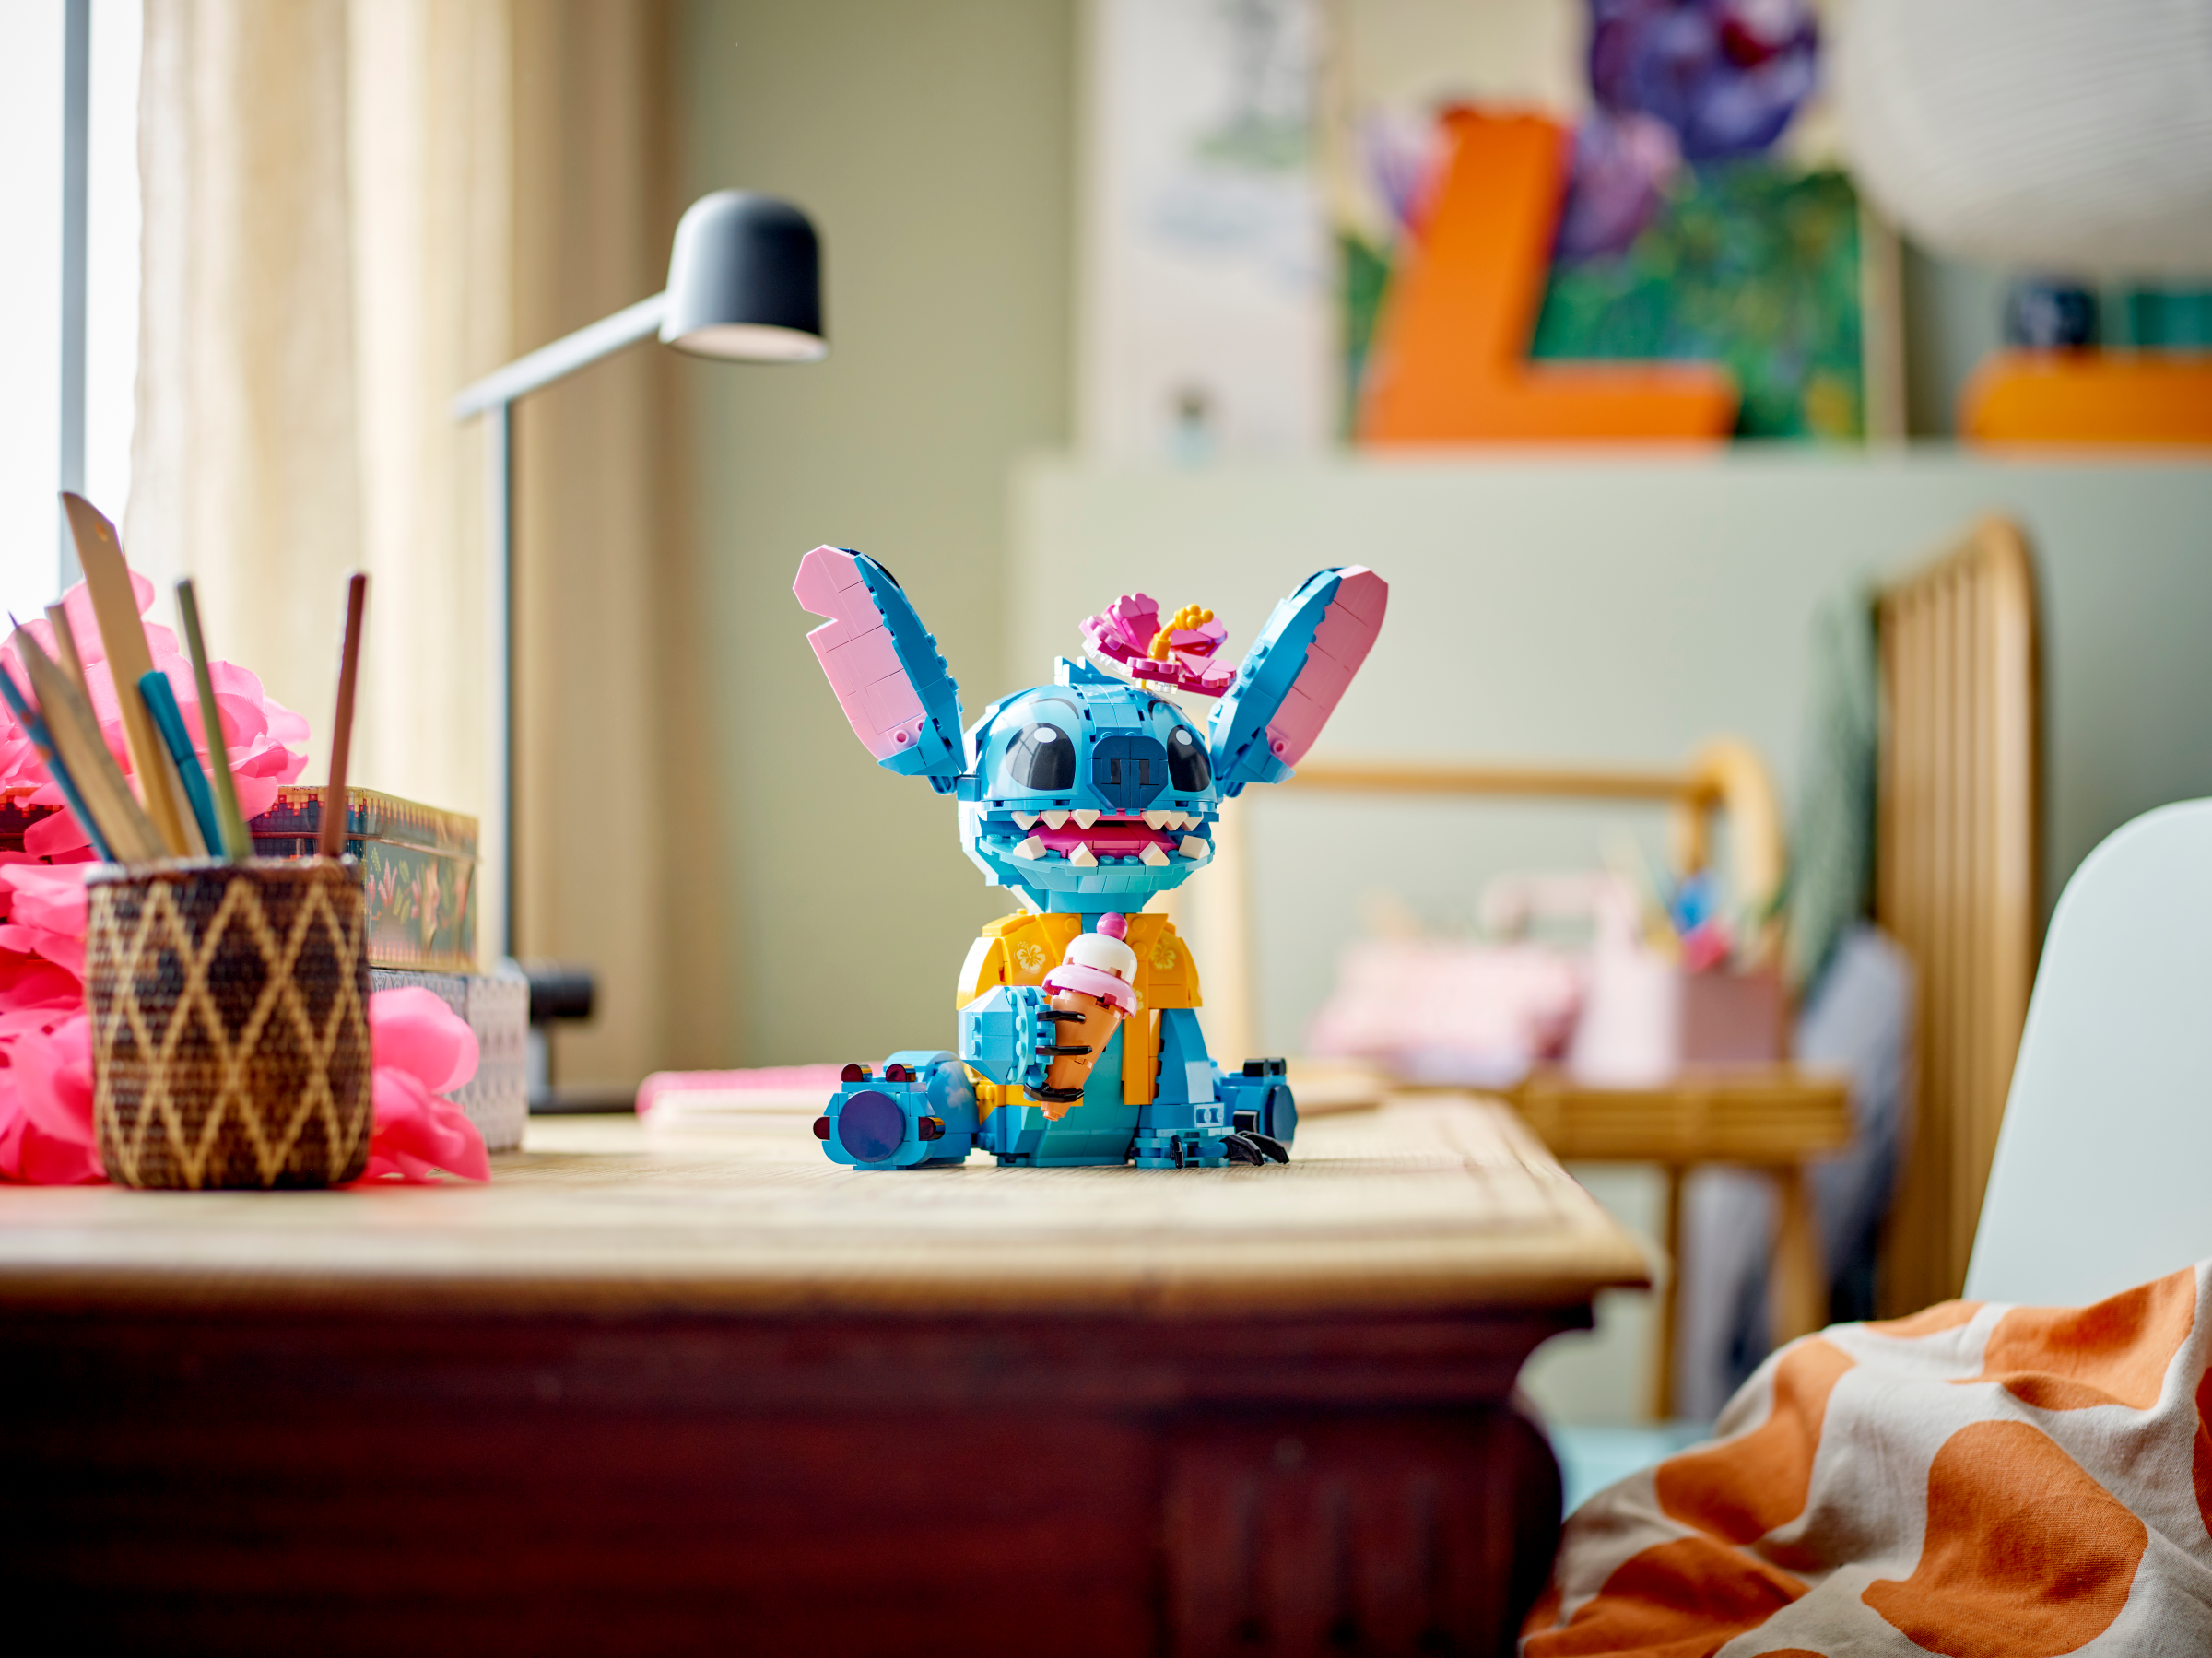 Say 'Aloha' to the NEW Lego Stitch Set Coming Soon 